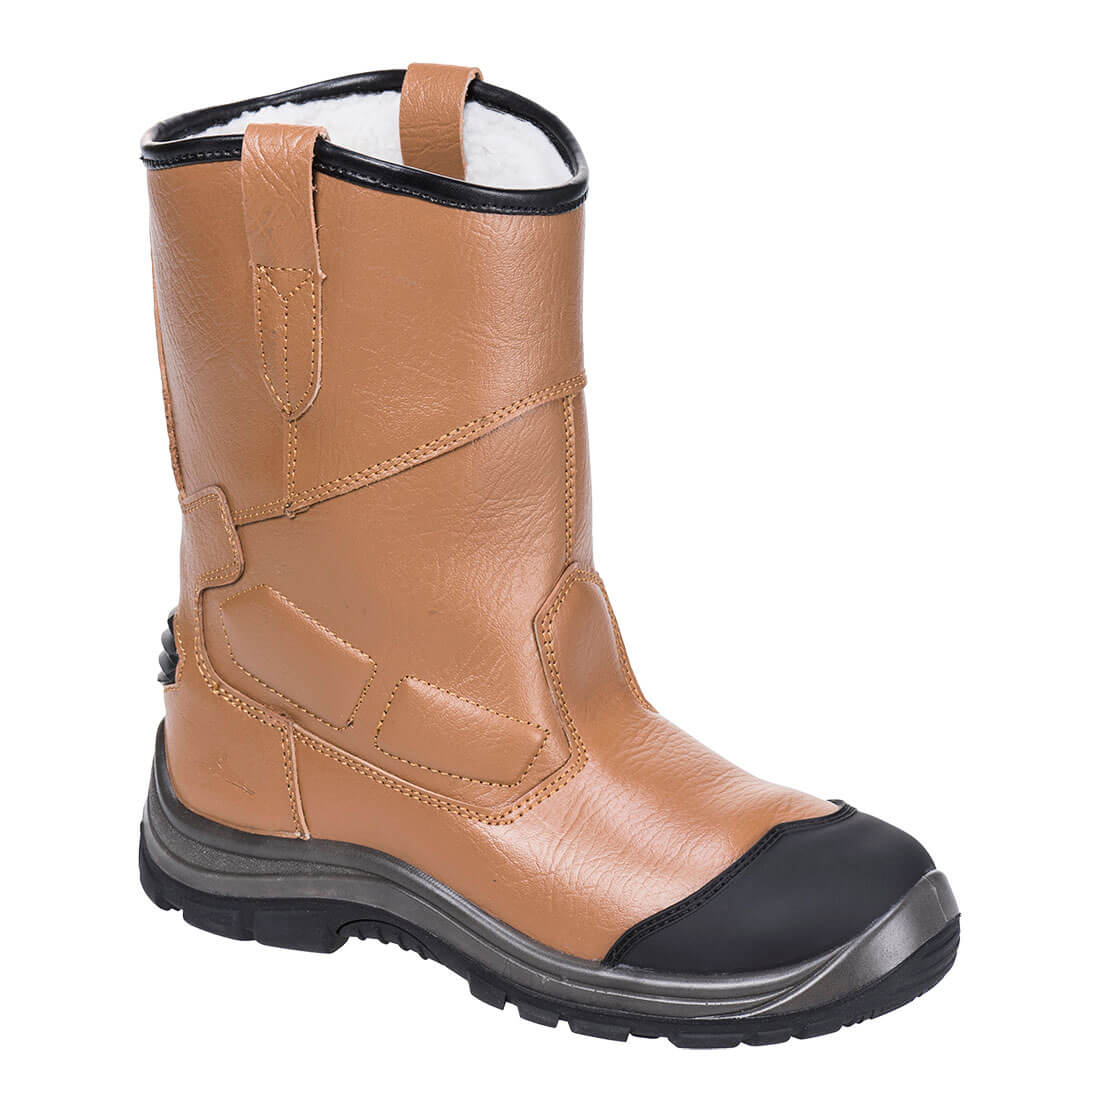 Portwest Steelite Pro Fur Lined Safety Rigger Boots Tan Size 5